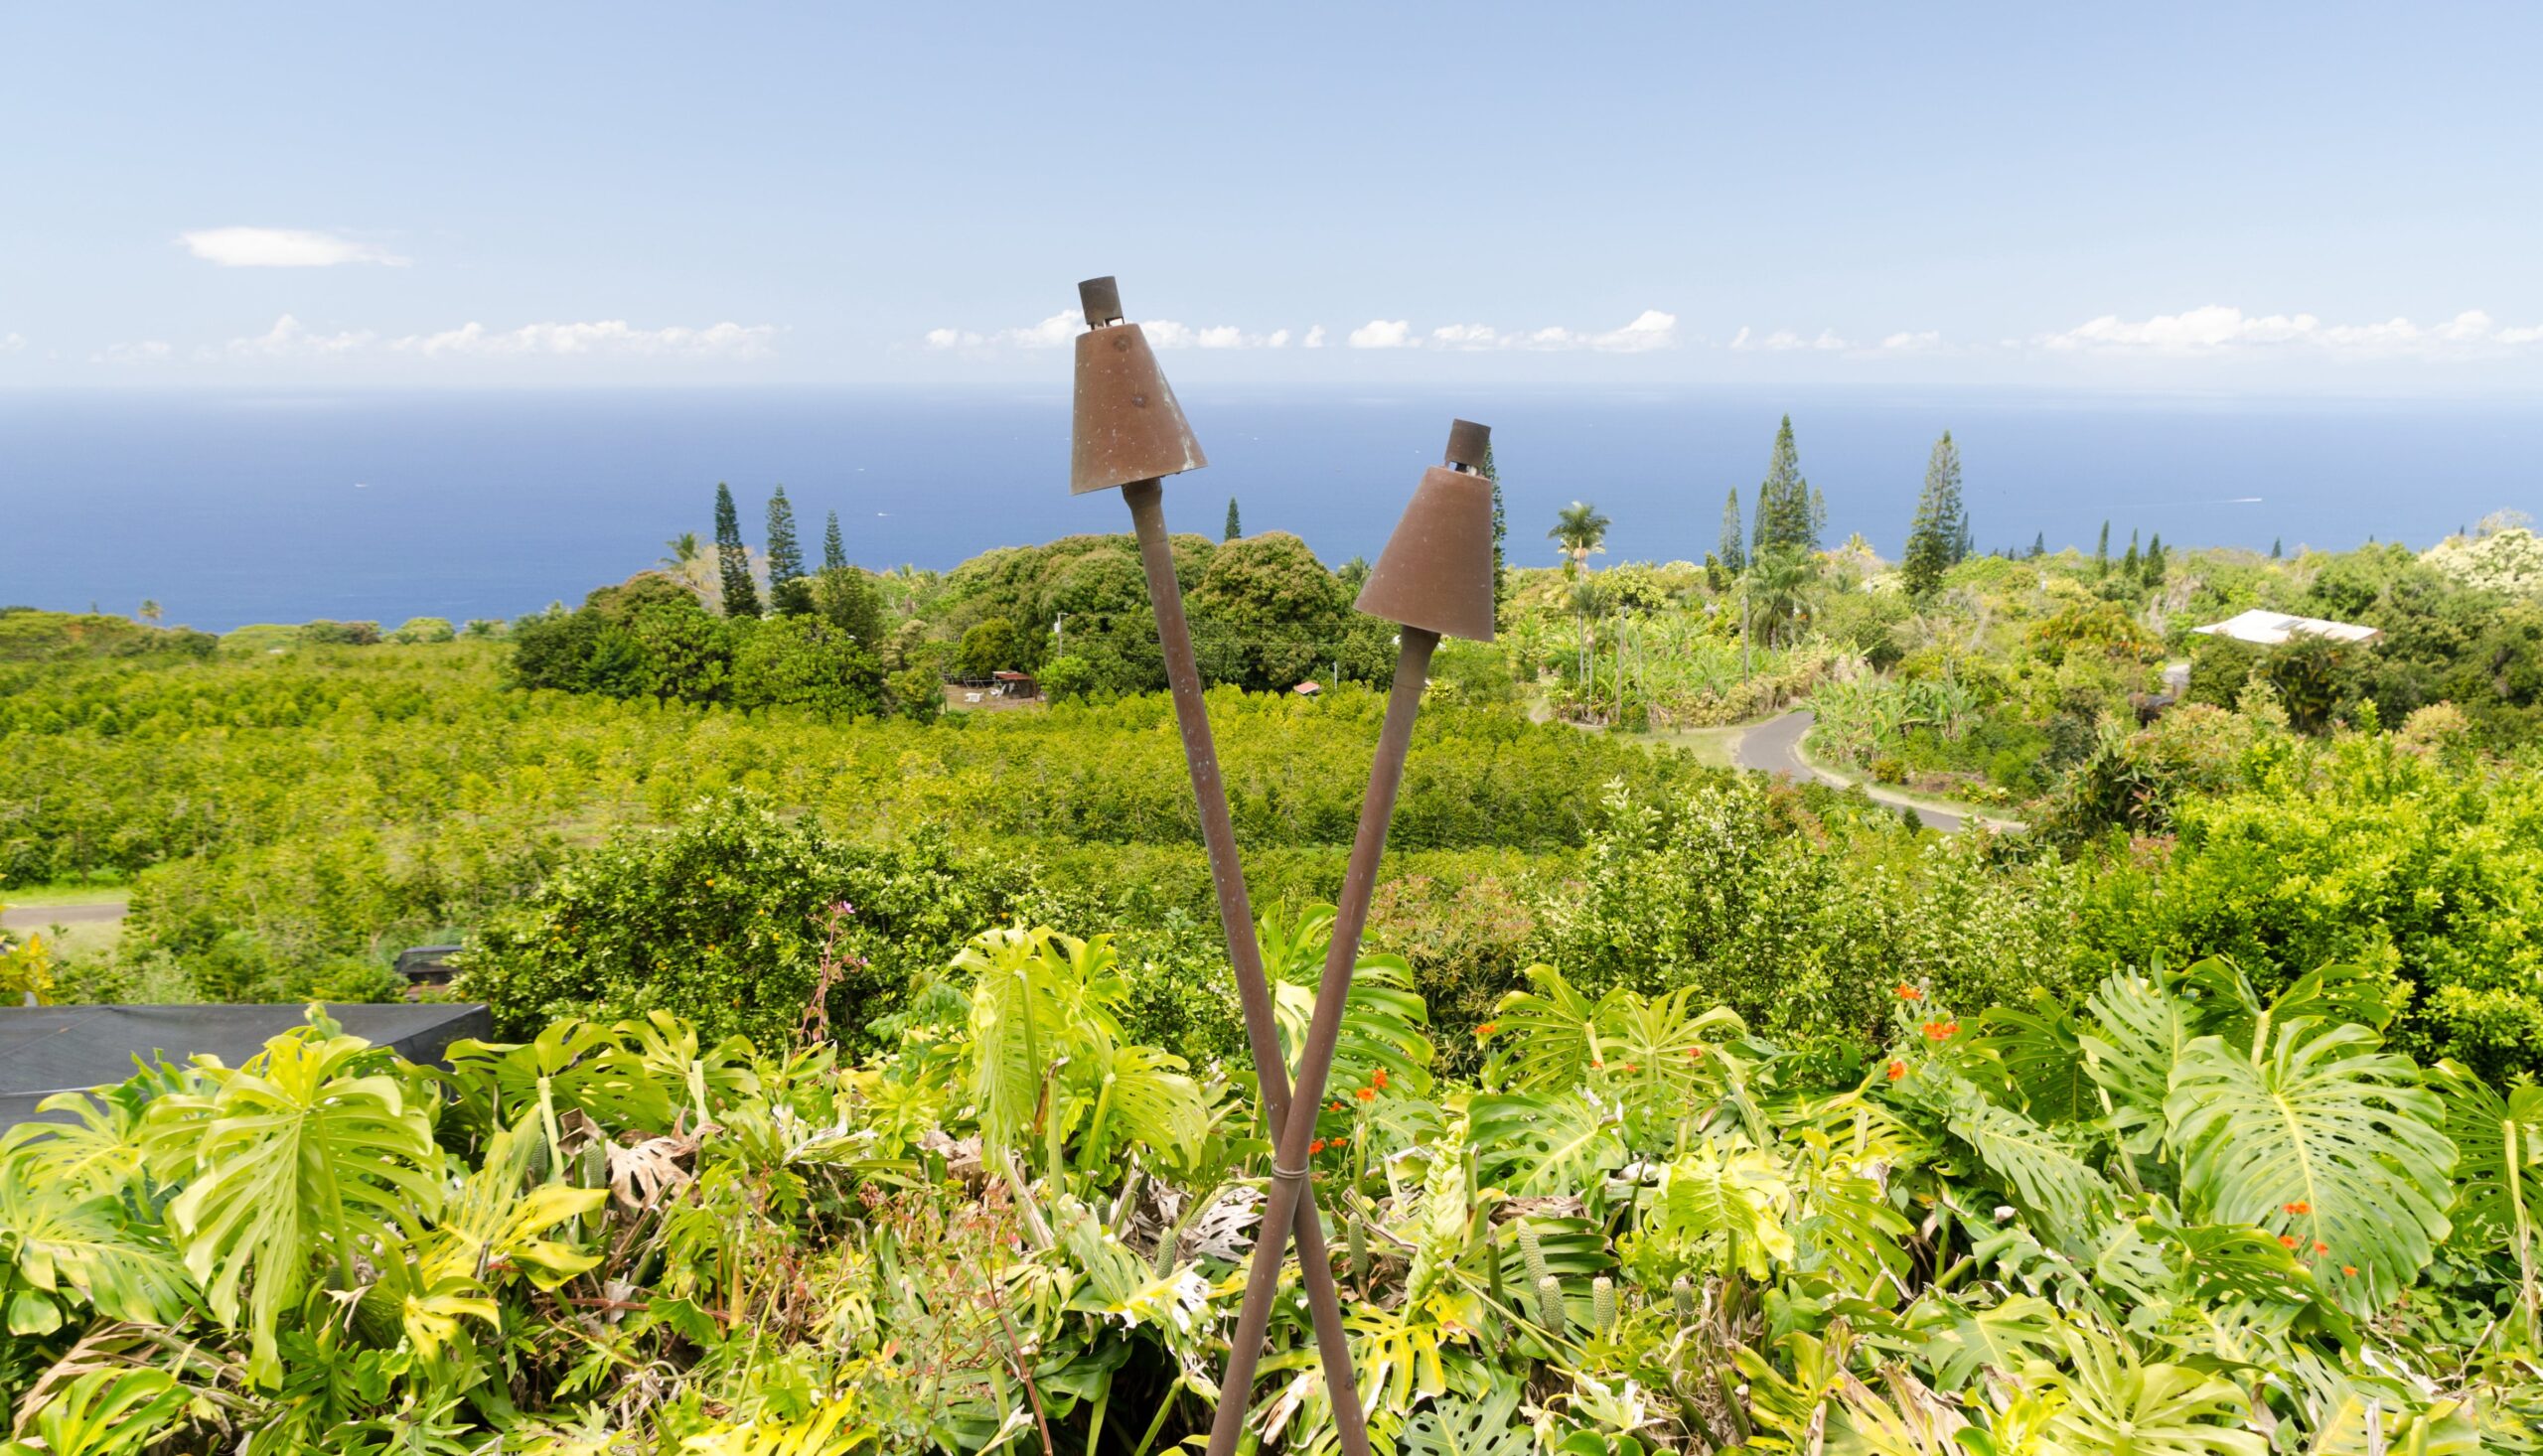 Photo of Hawaii, two tiki torches crossed over each other overlooking a plant covered hillside.